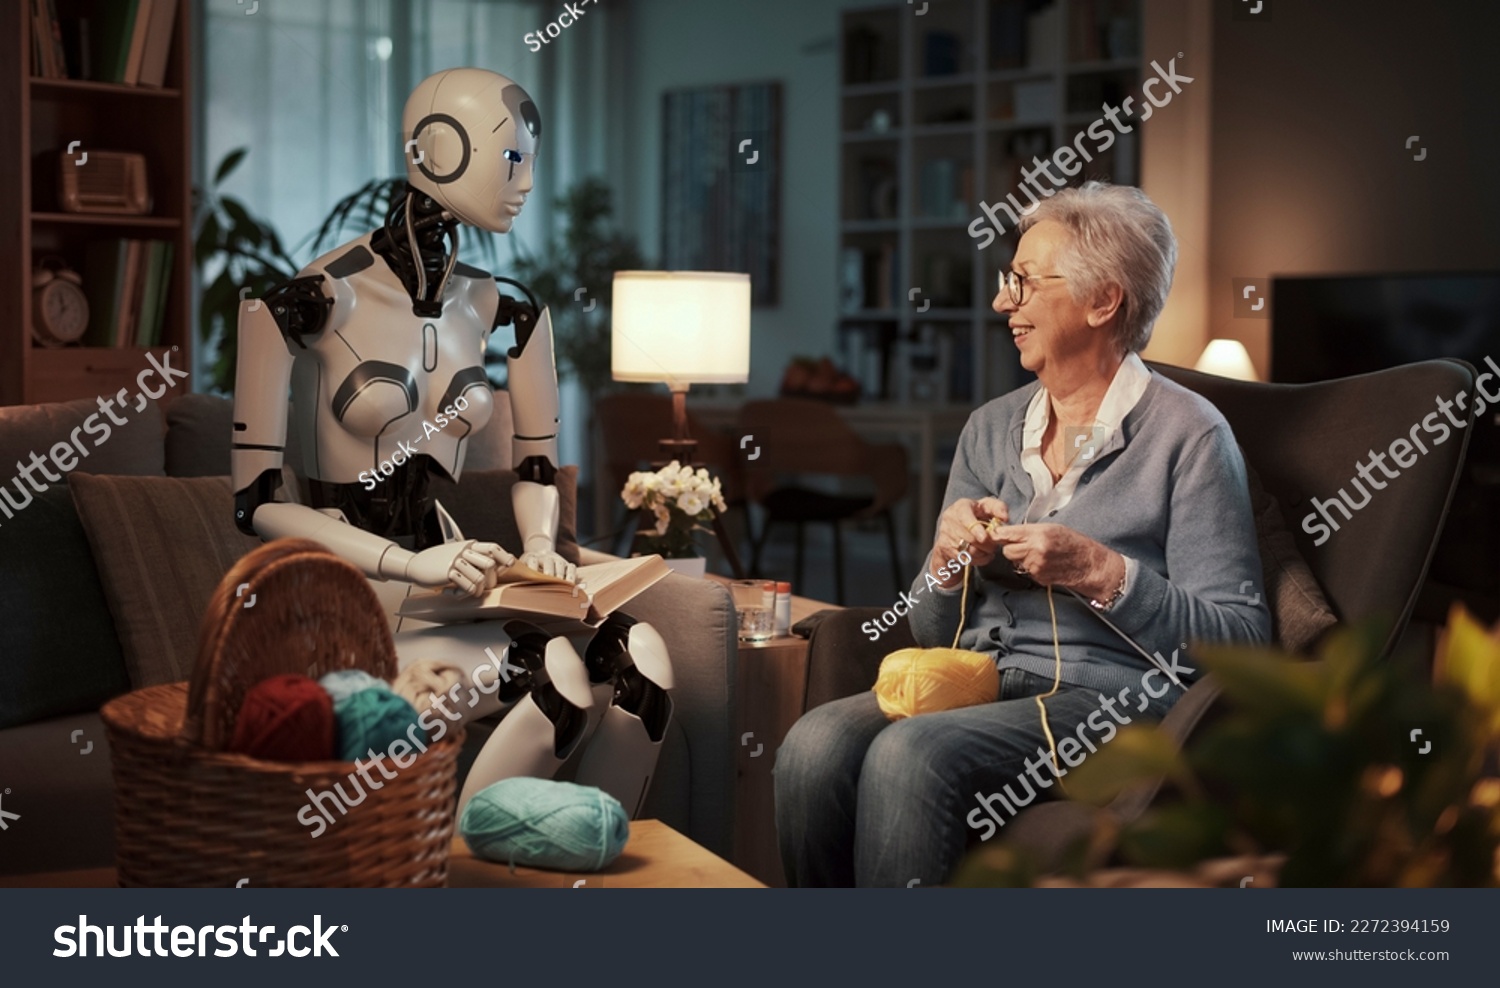 Elderly woman knitting on a sofa with her companion android reading a book in the living room. Concept of elderly care and future. #2272394159